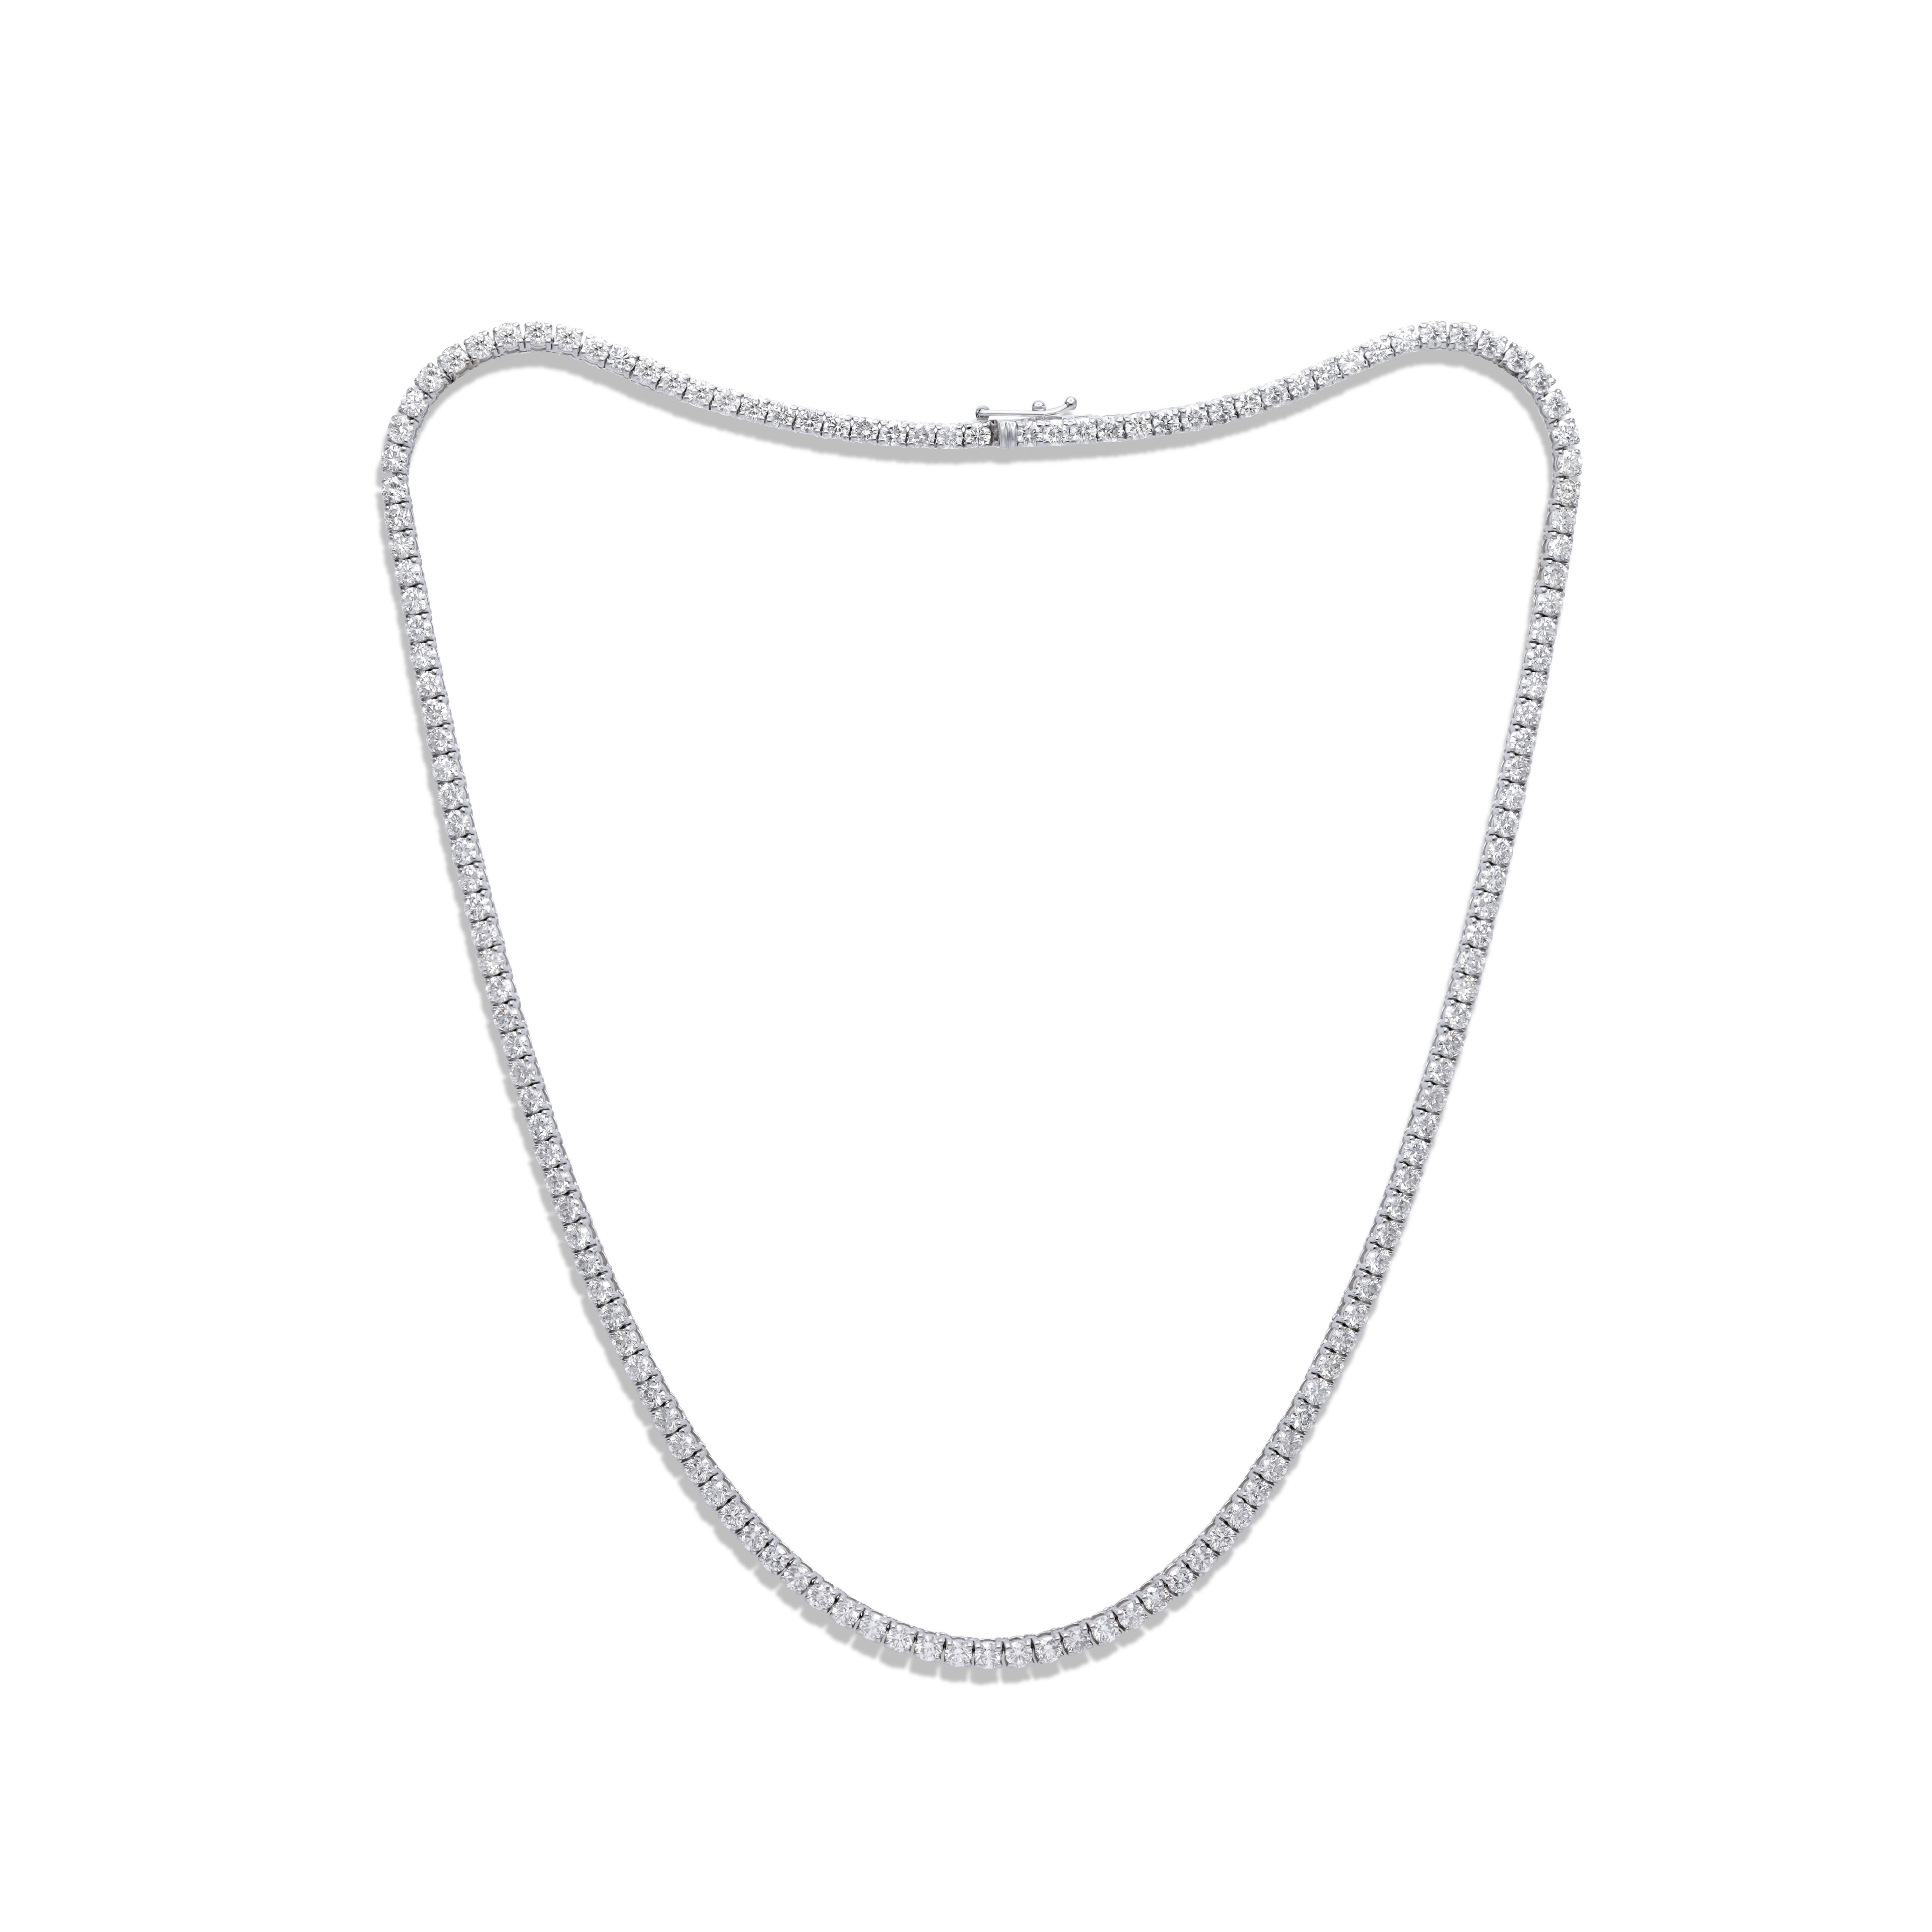 14K White Gold Diamond Straight Line Tennis Necklace Features 13.15Cts of Diamonds, 144St. Diana M. is a leading supplier of top-quality fine jewelry for over 35 years.
Diana M is one-stop shop for all your jewelry shopping, carrying line of diamond